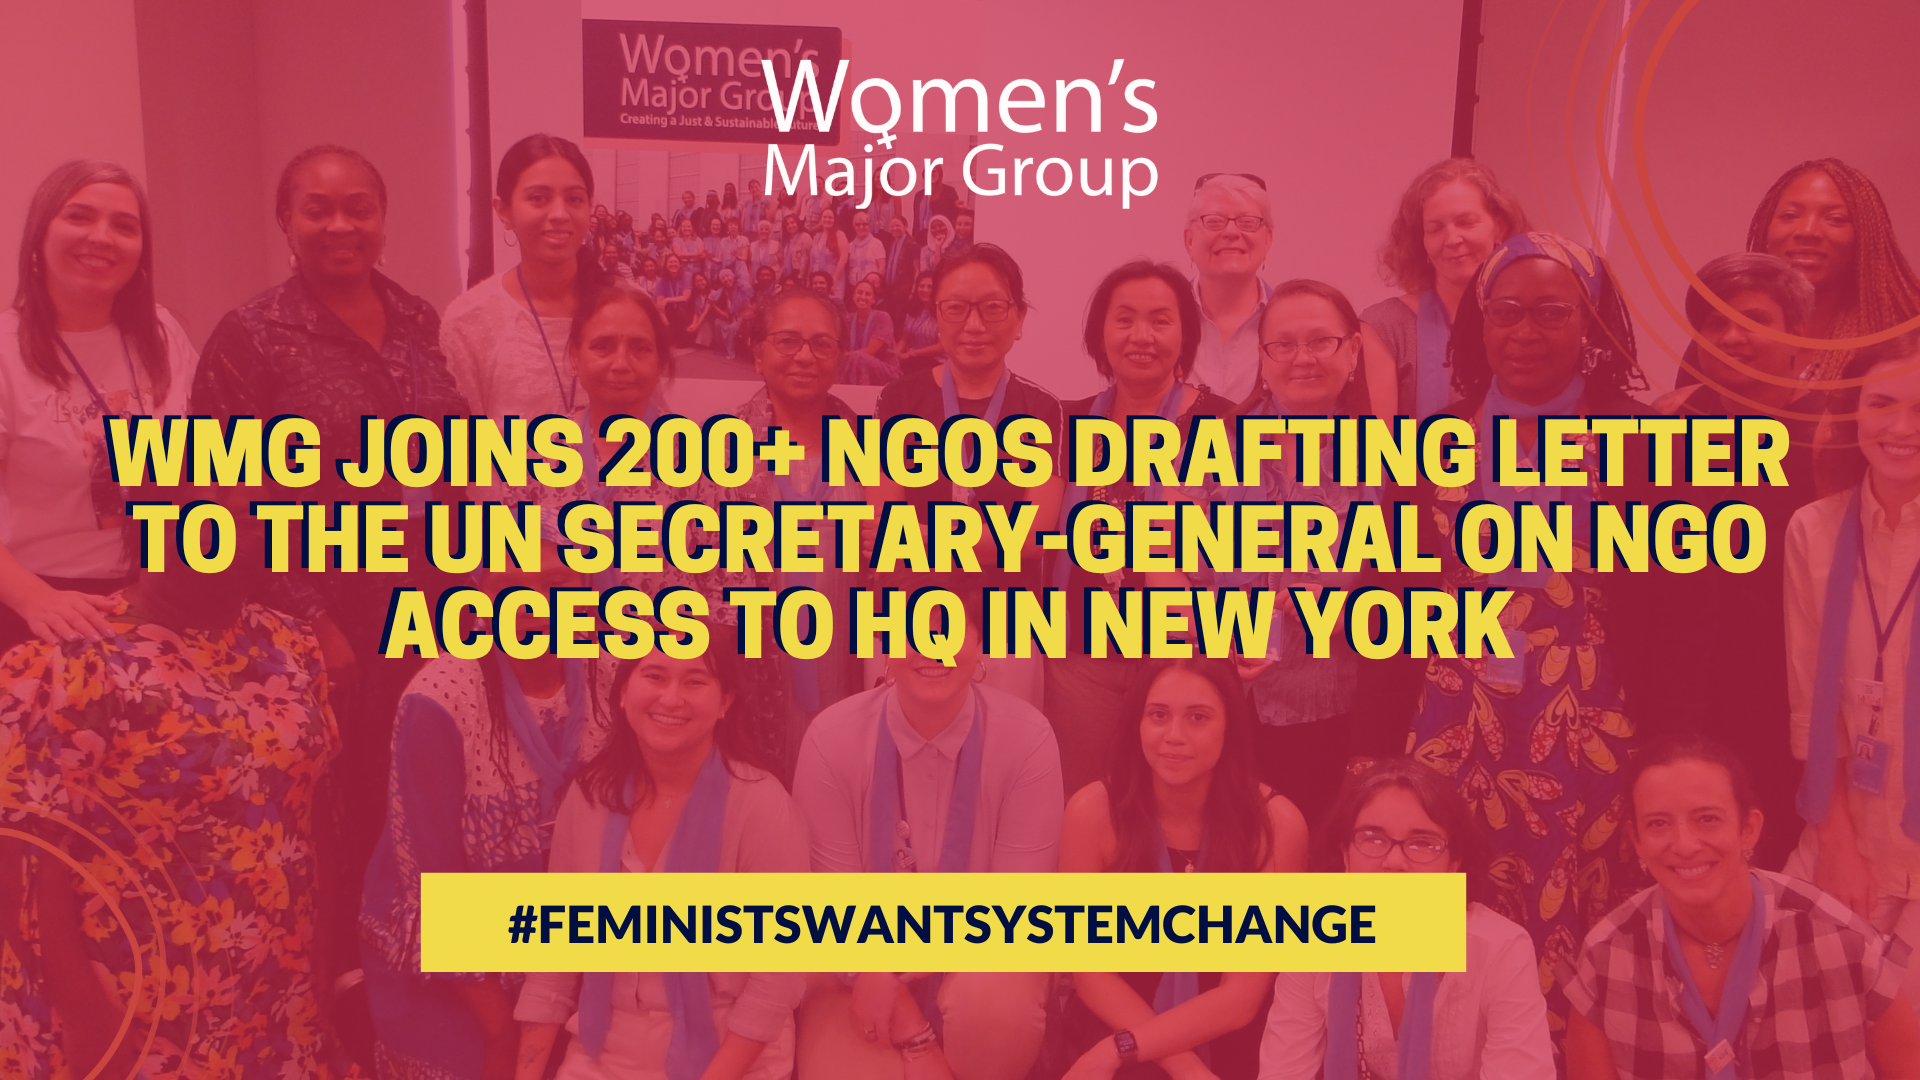 Red Wep Rep Videos - WMG joins 200+ NGOs drafting letter to the UN Secretary-General on NGO  access to HQ in New York - Women's Major Group